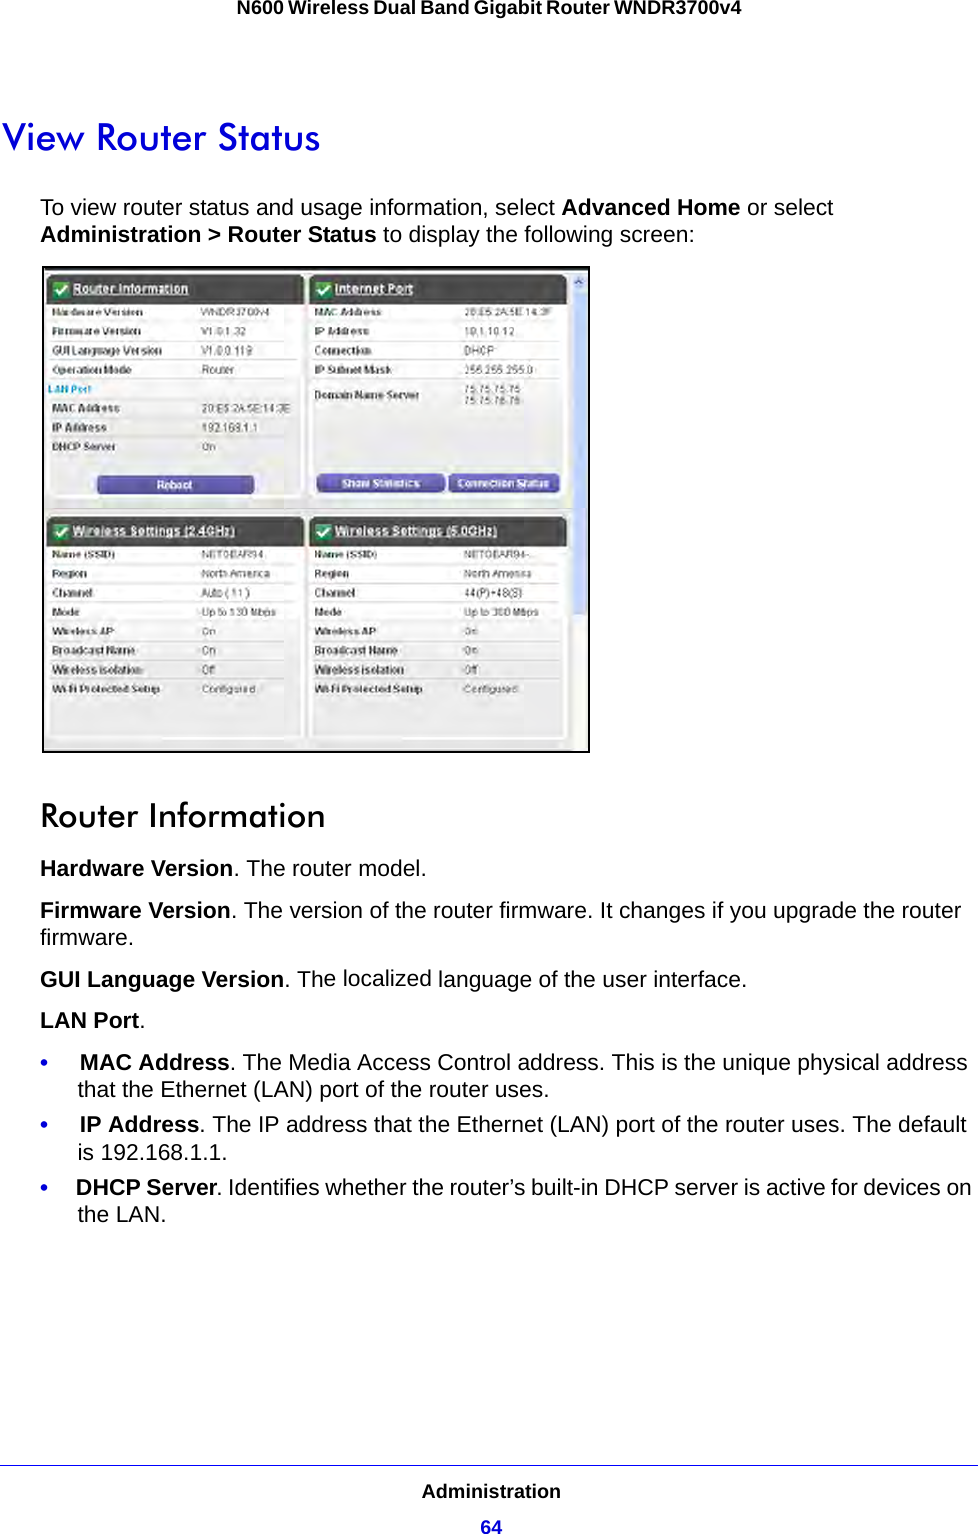 Administration64N600 Wireless Dual Band Gigabit Router WNDR3700v4 View Router StatusTo view router status and usage information, select Advanced Home or select Administration &gt; Router Status to display the following screen: Router InformationHardware Version. The router model.Firmware Version. The version of the router firmware. It changes if you upgrade the router firmware.GUI Language Version. The localized language of the user interface.LAN Port.•     MAC Address. The Media Access Control address. This is the unique physical address that the Ethernet (LAN) port of the router uses. •     IP Address. The IP address that the Ethernet (LAN) port of the router uses. The default is 192.168.1.1.•     DHCP Server. Identifies whether the router’s built-in DHCP server is active for devices on the LAN.